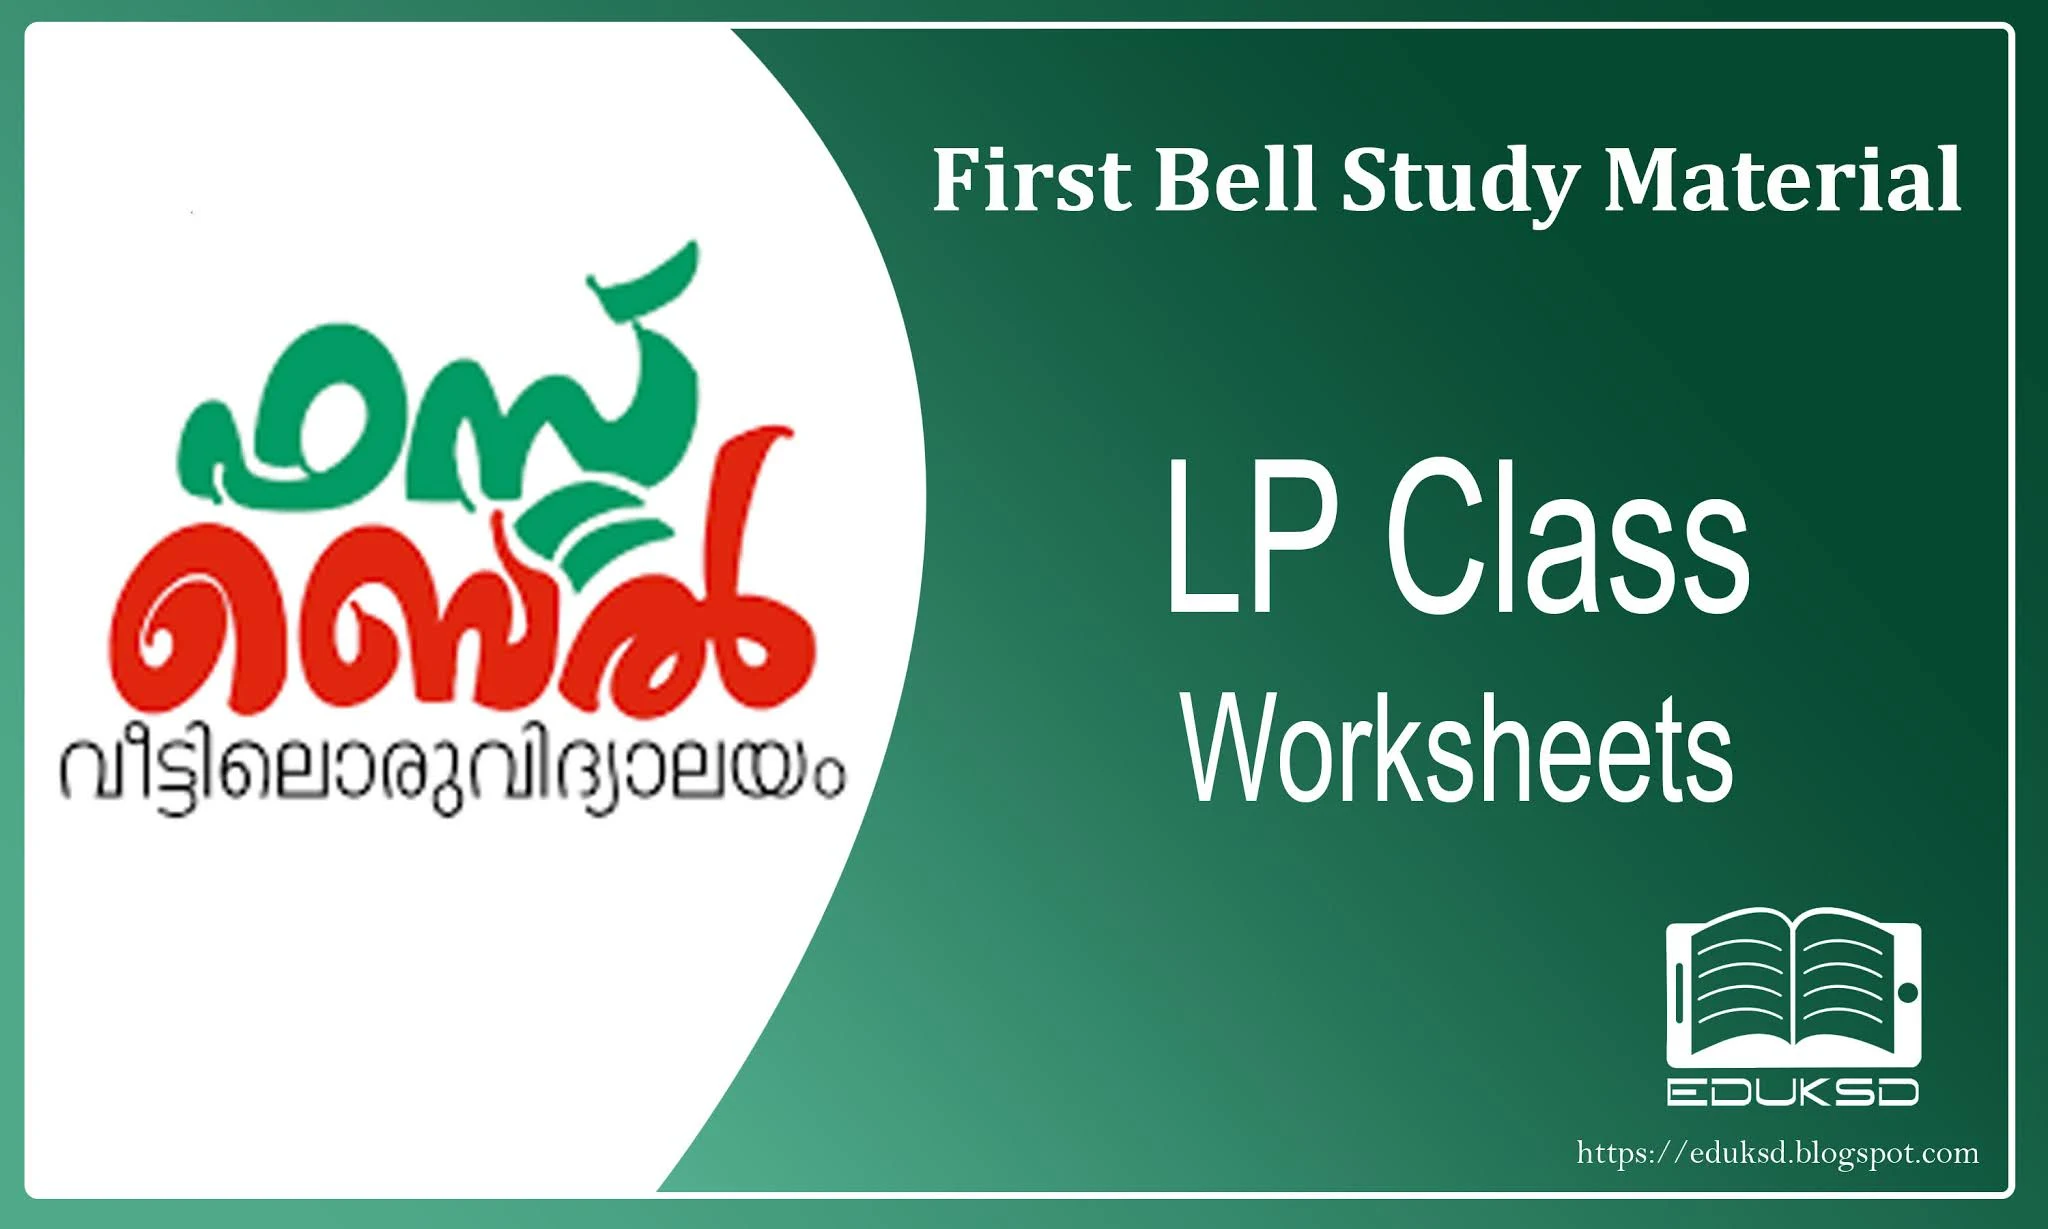 First Bell Study Material, Worksheets for Lower Primary Classes